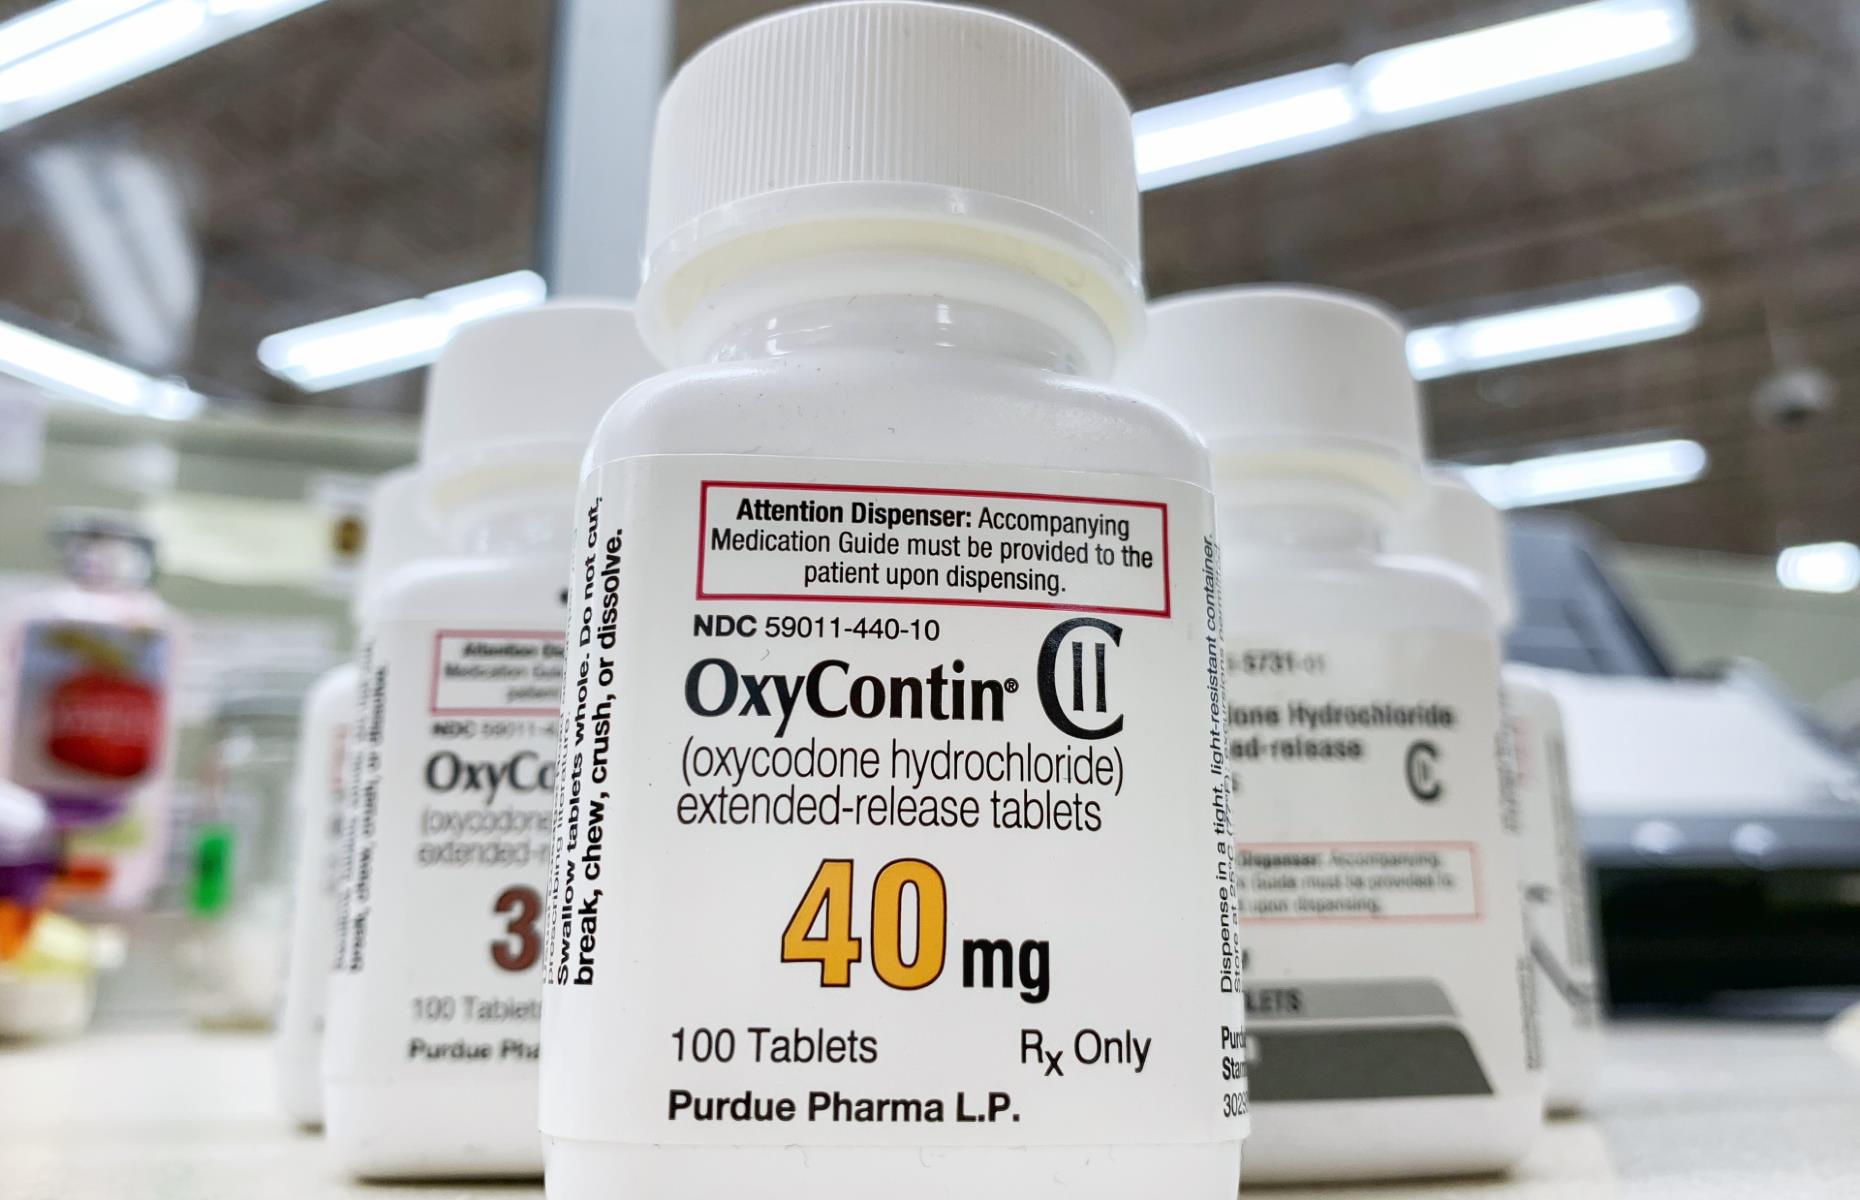 Purdue Pharma is paying claimants up to $48,000